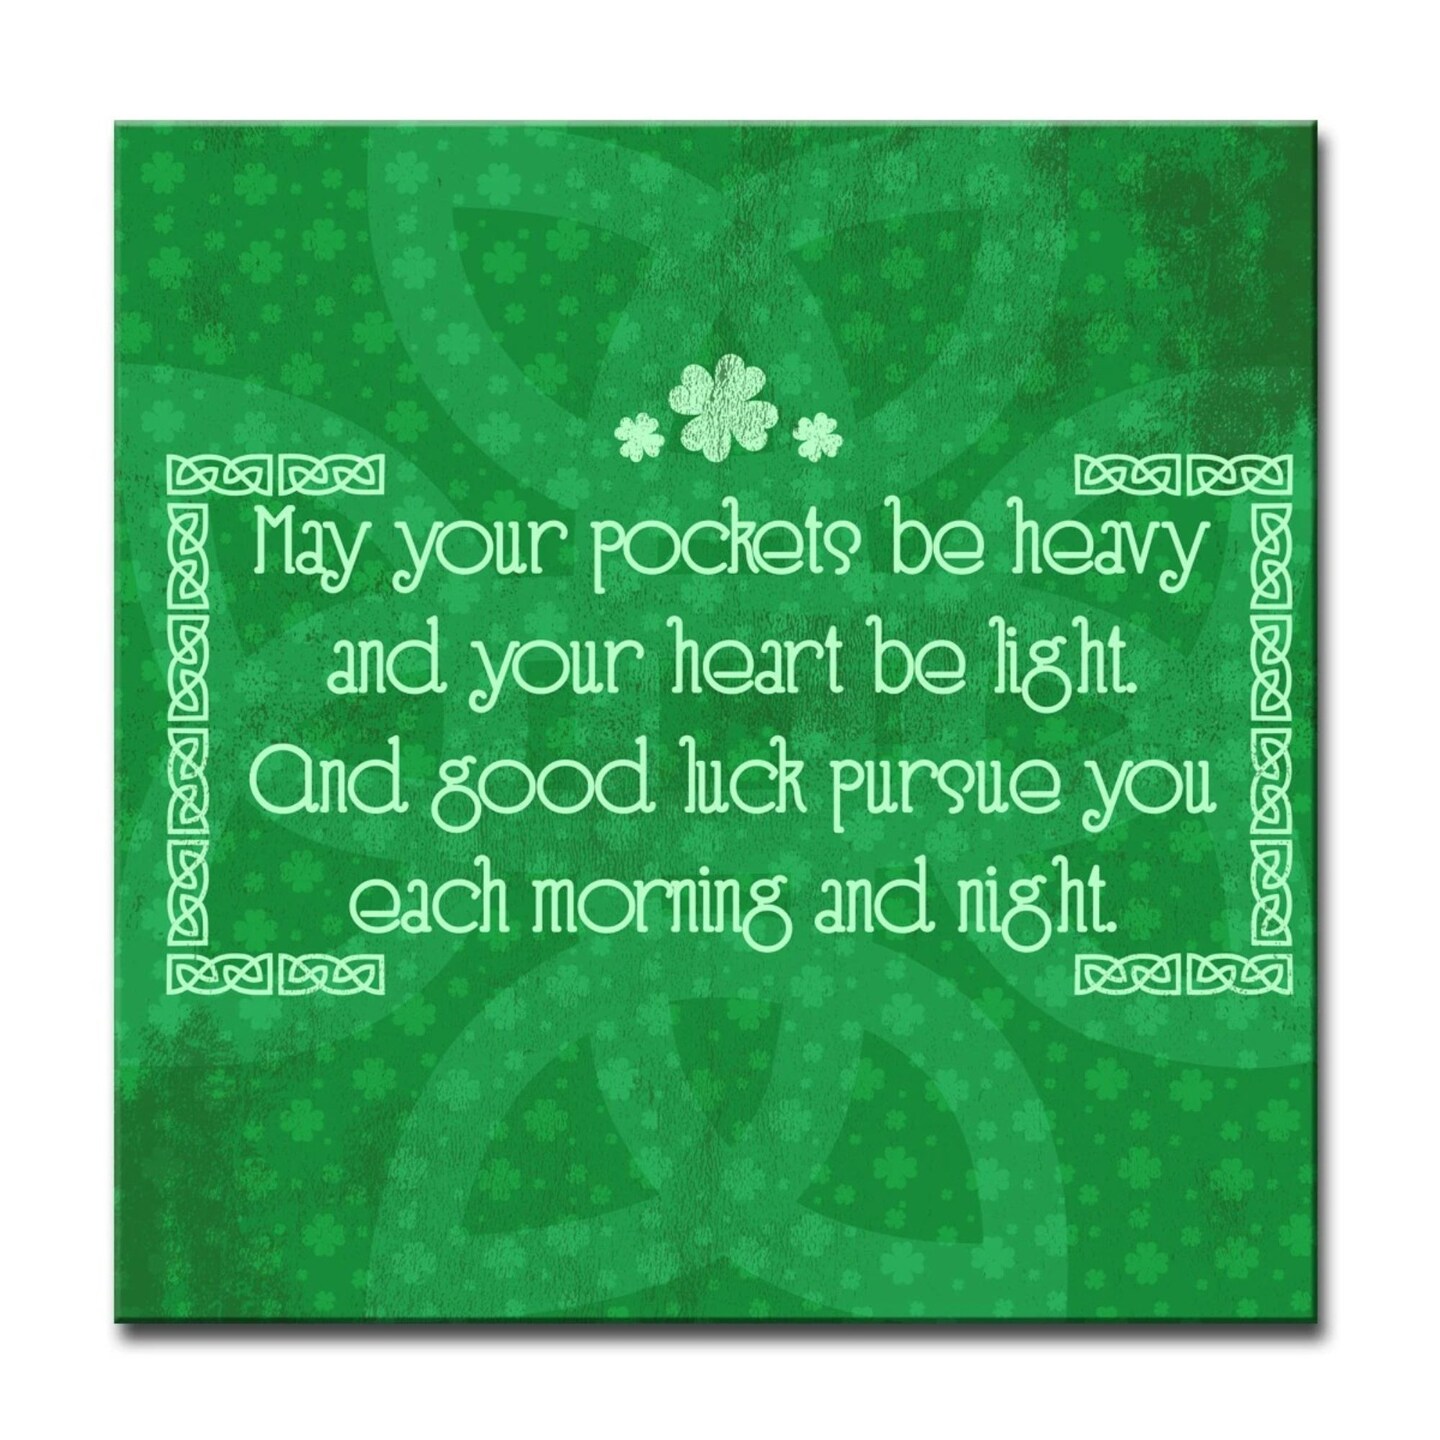 Crafted Creations Green Good Old Irish Luck St. Patrick&#x2019;s Day Square Cotton Wall Art Decor 12&#x22; x 12&#x22;